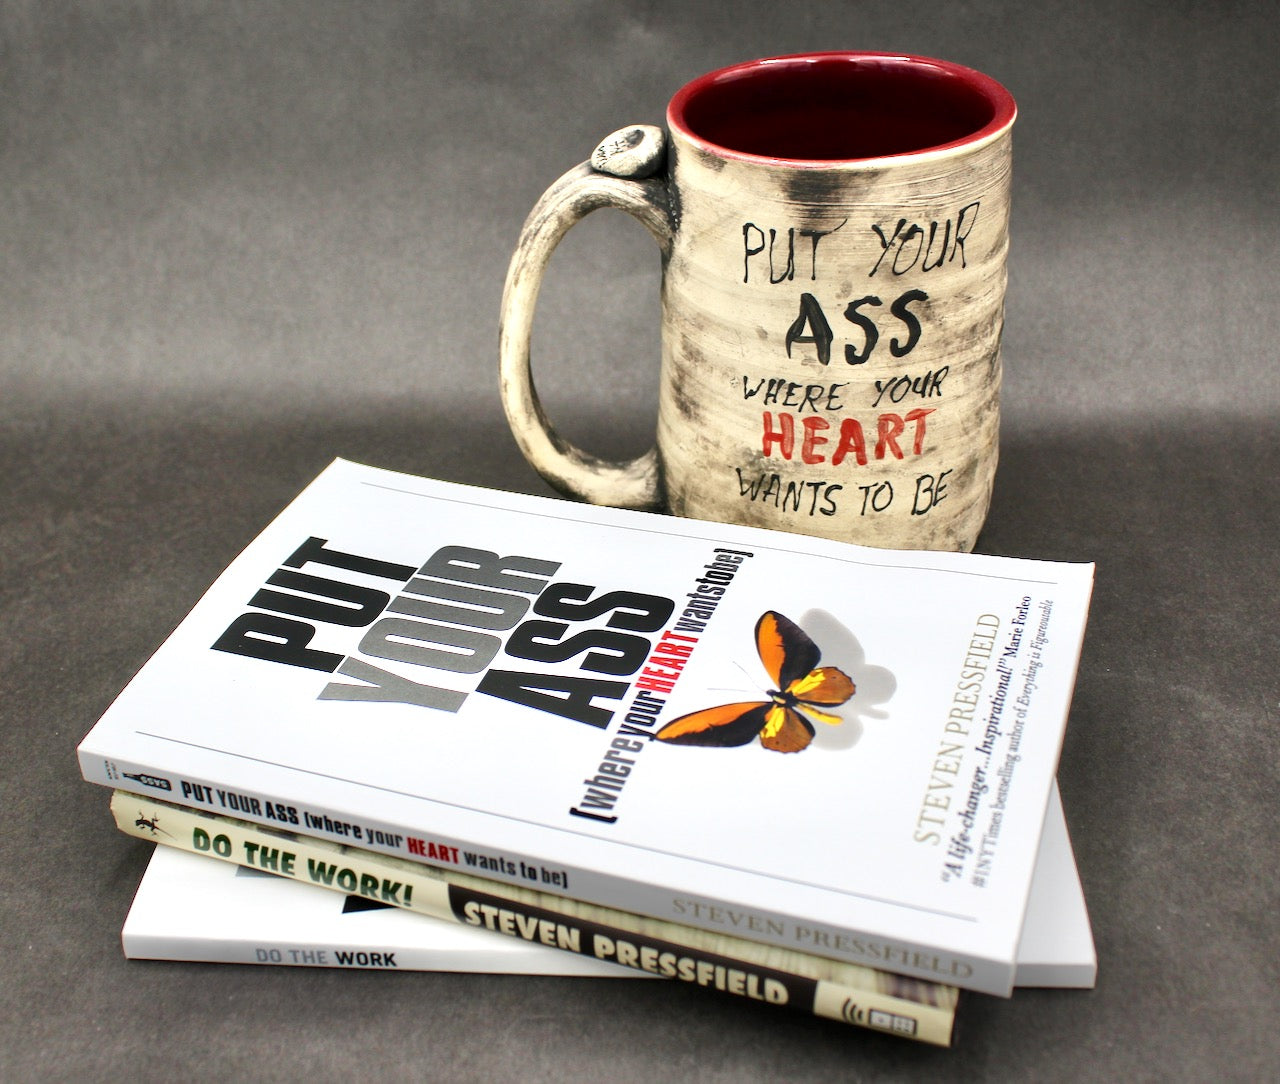 One Mug and 3 Autographed Books by Steven Pressfield (SK7790)